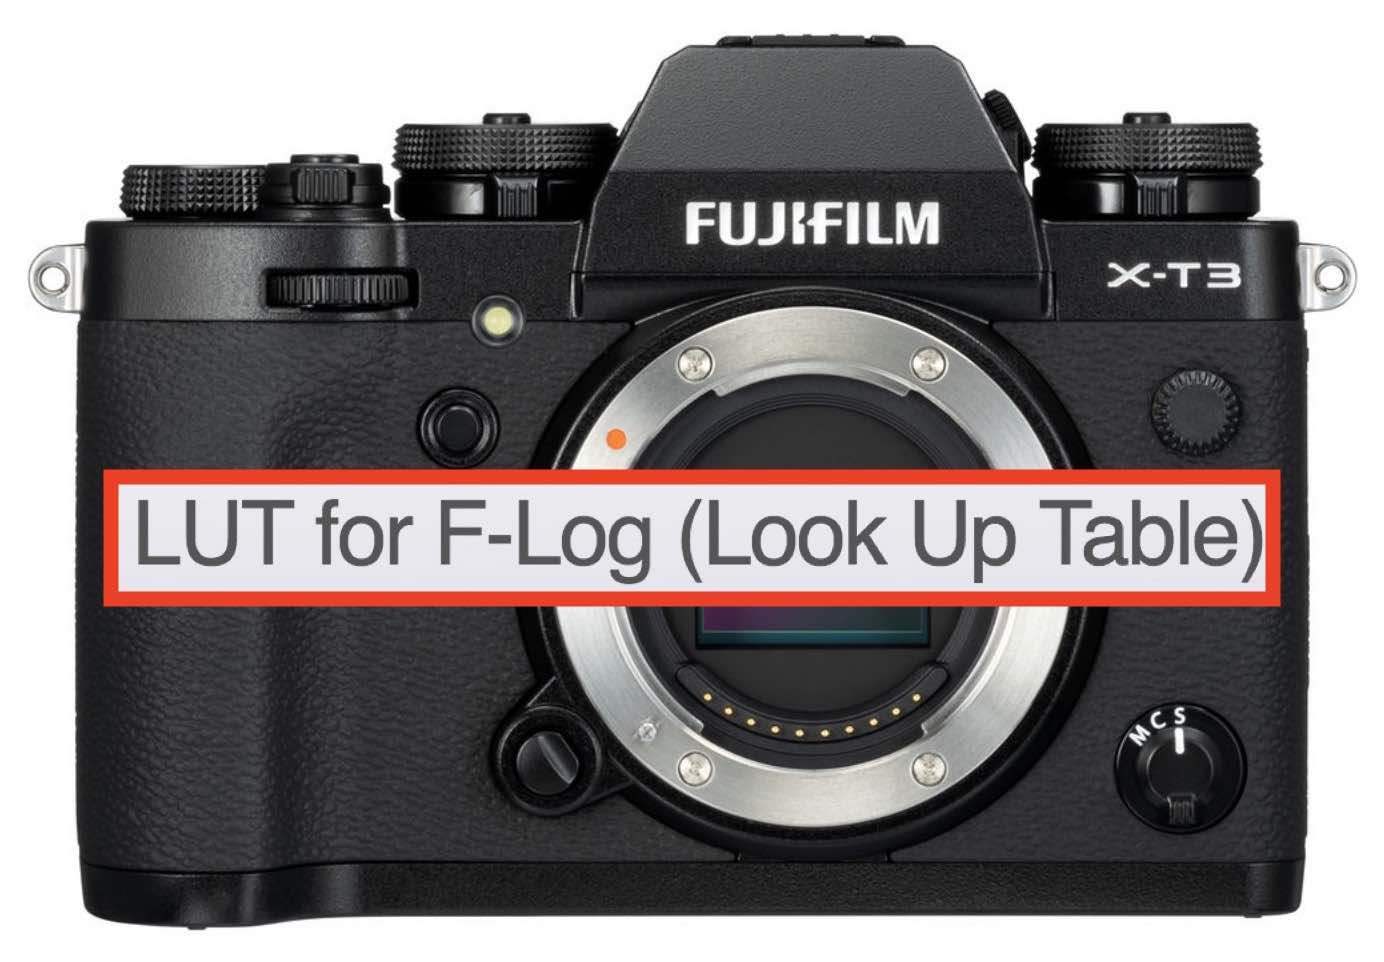 X-T3 Look Up Table for F-Log Available and First Feedback - Fuji Rumors